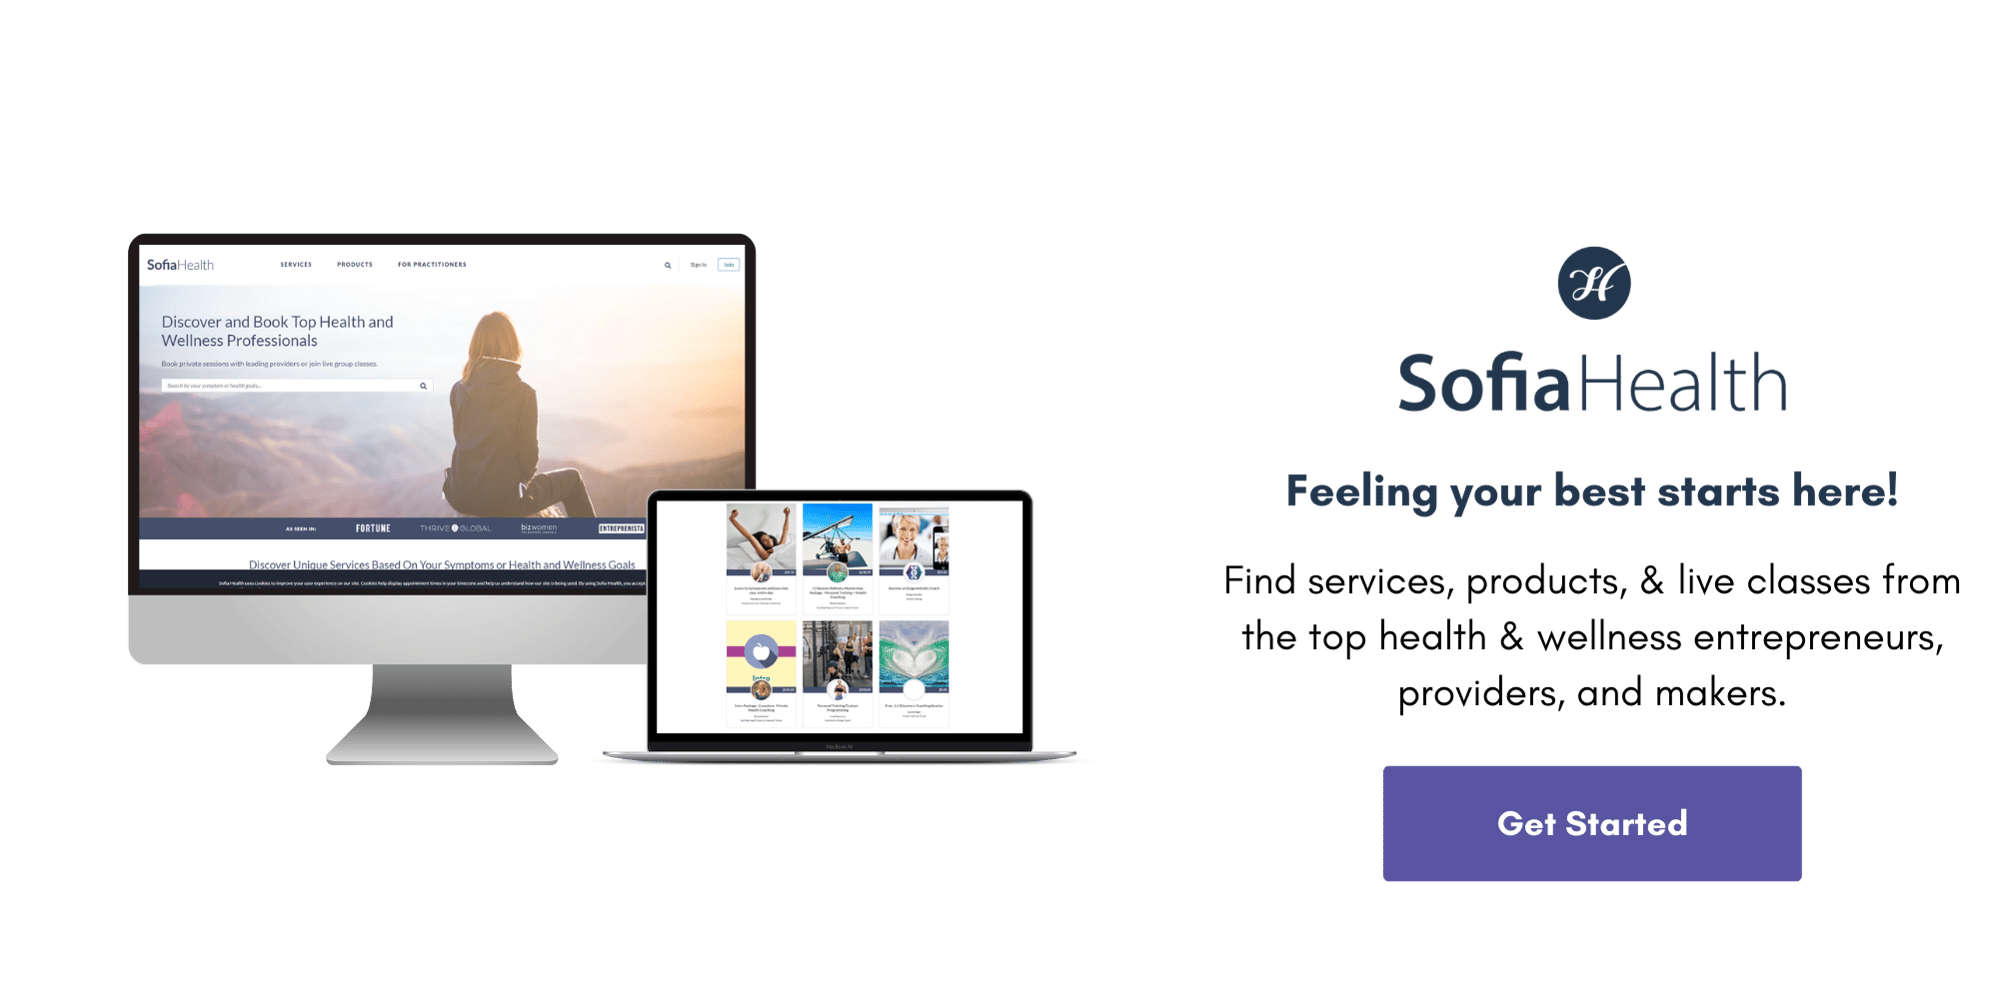 Sofia Health - Feeling your best starts here!-1